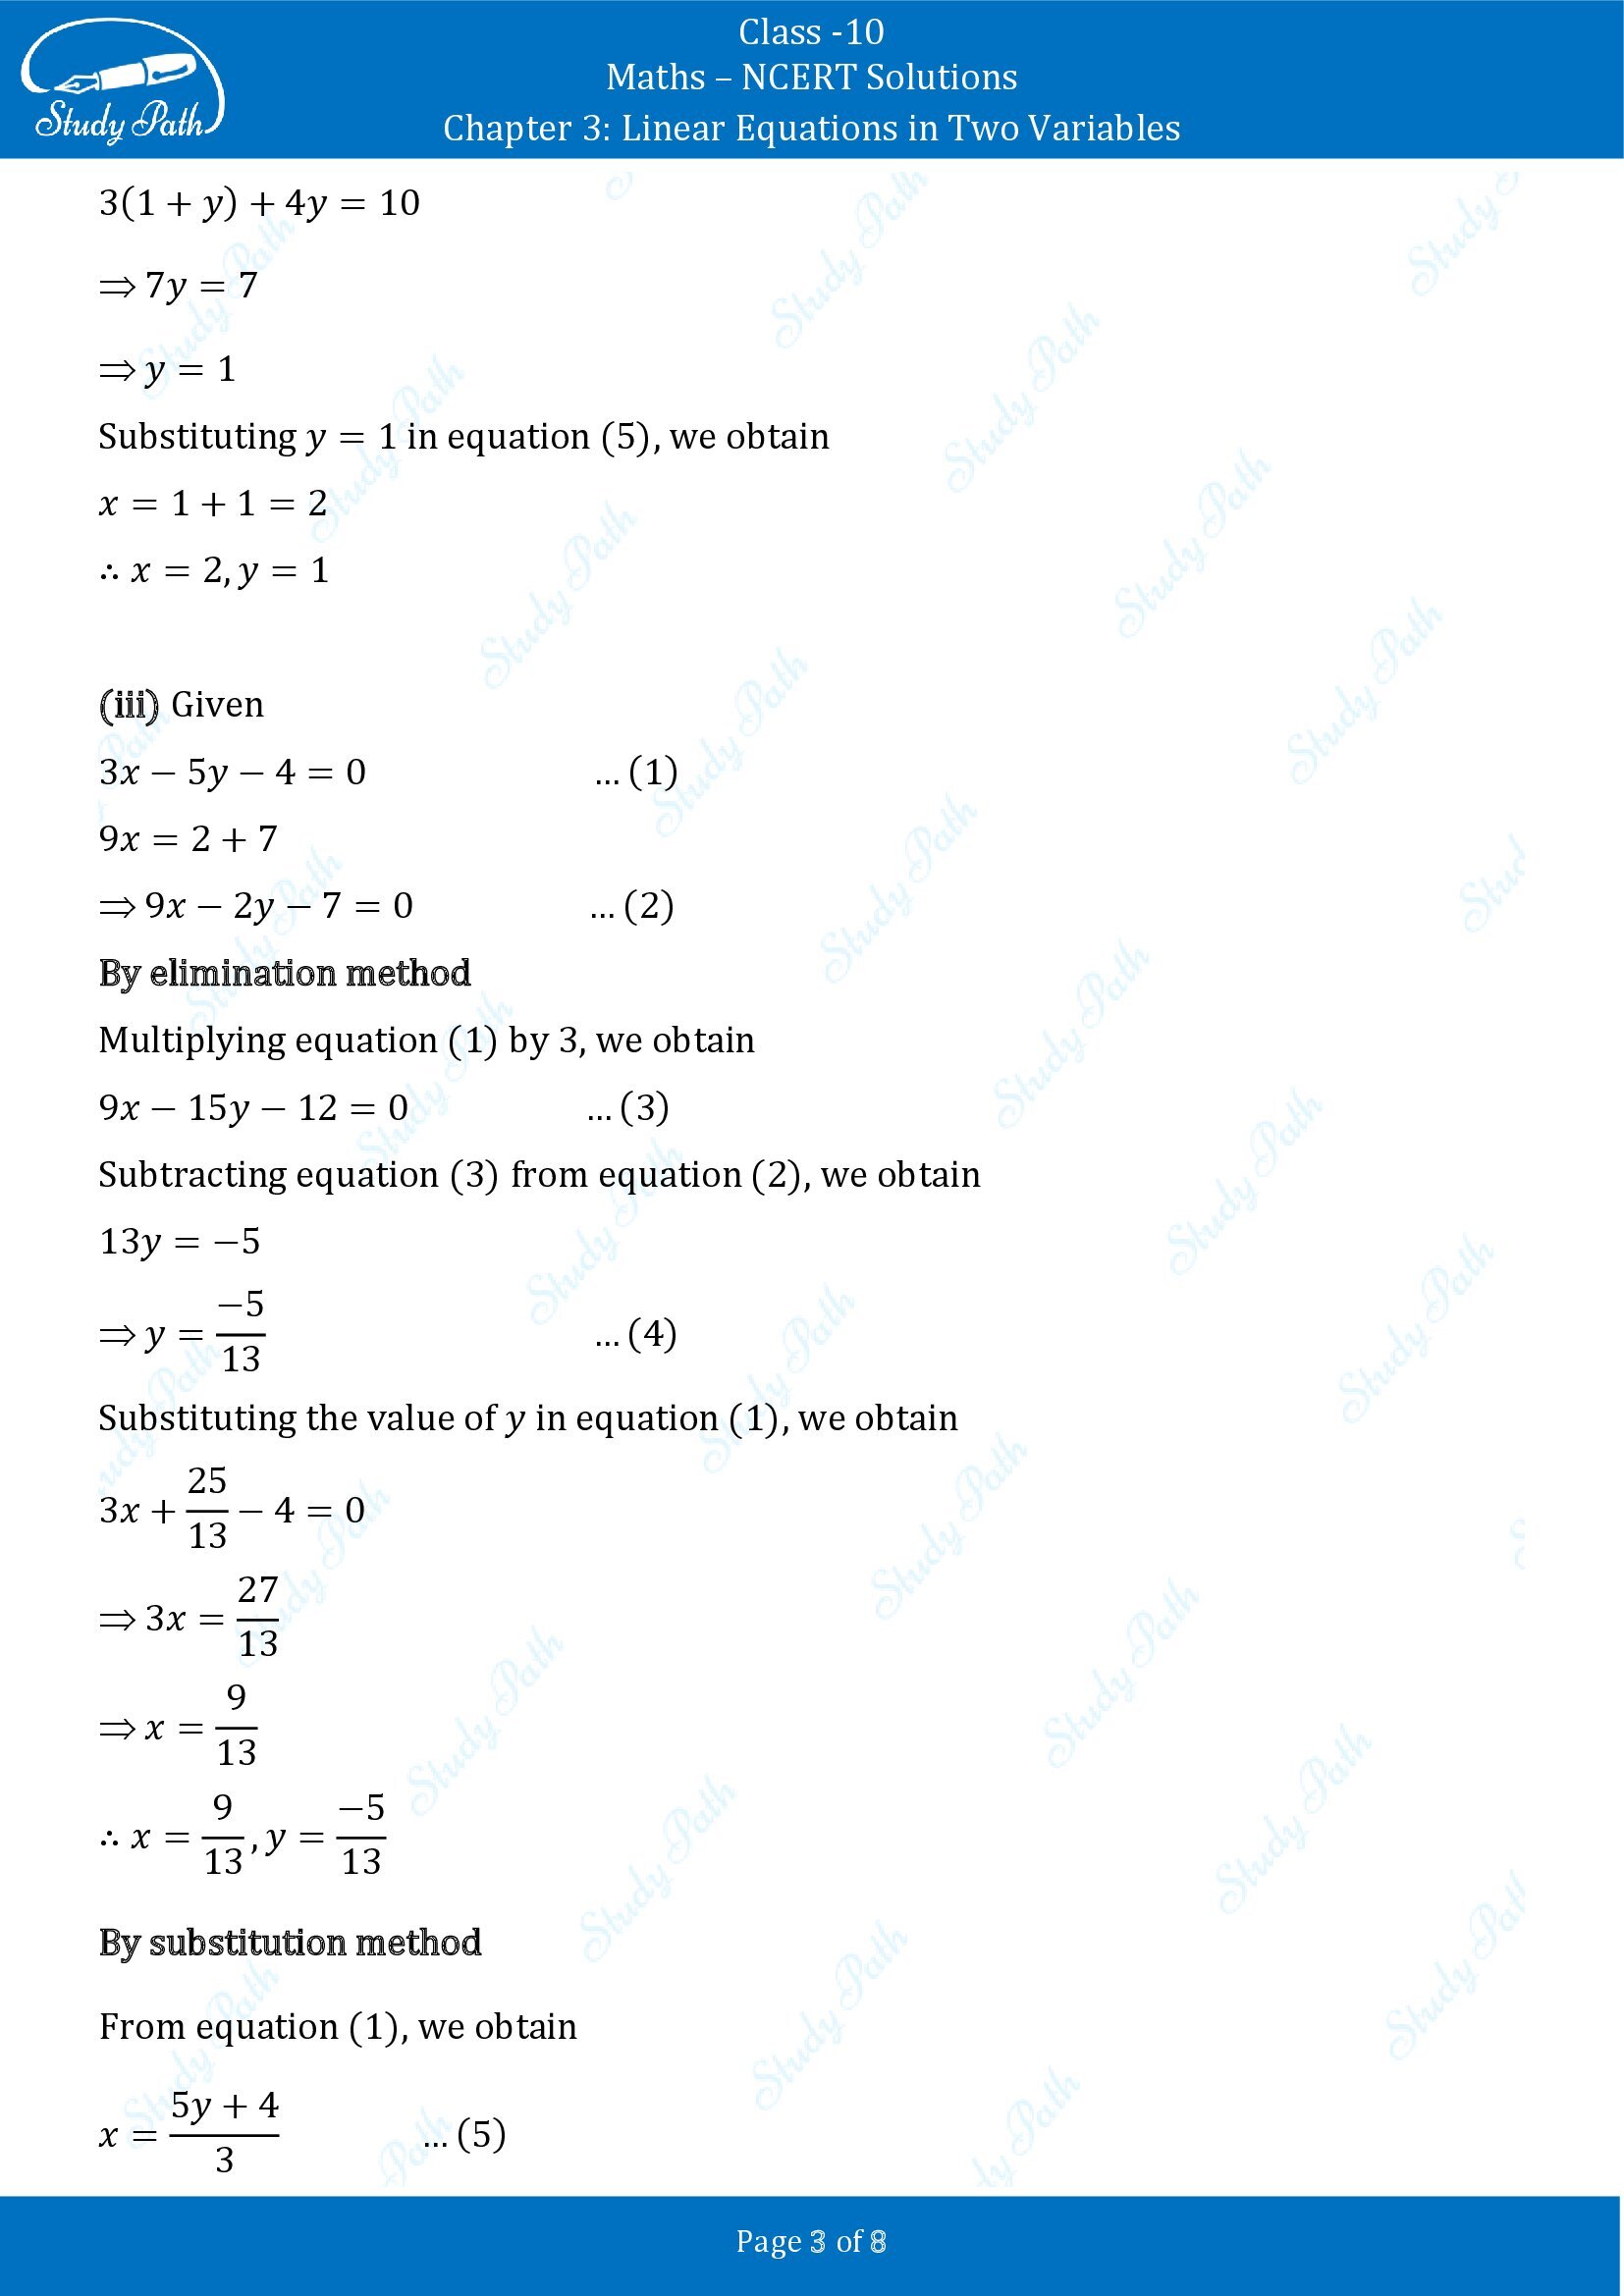 NCERT Solutions for Class 10 Maths Chapter 3 Linear Equations in Two Variables Exercise 3.4 00003